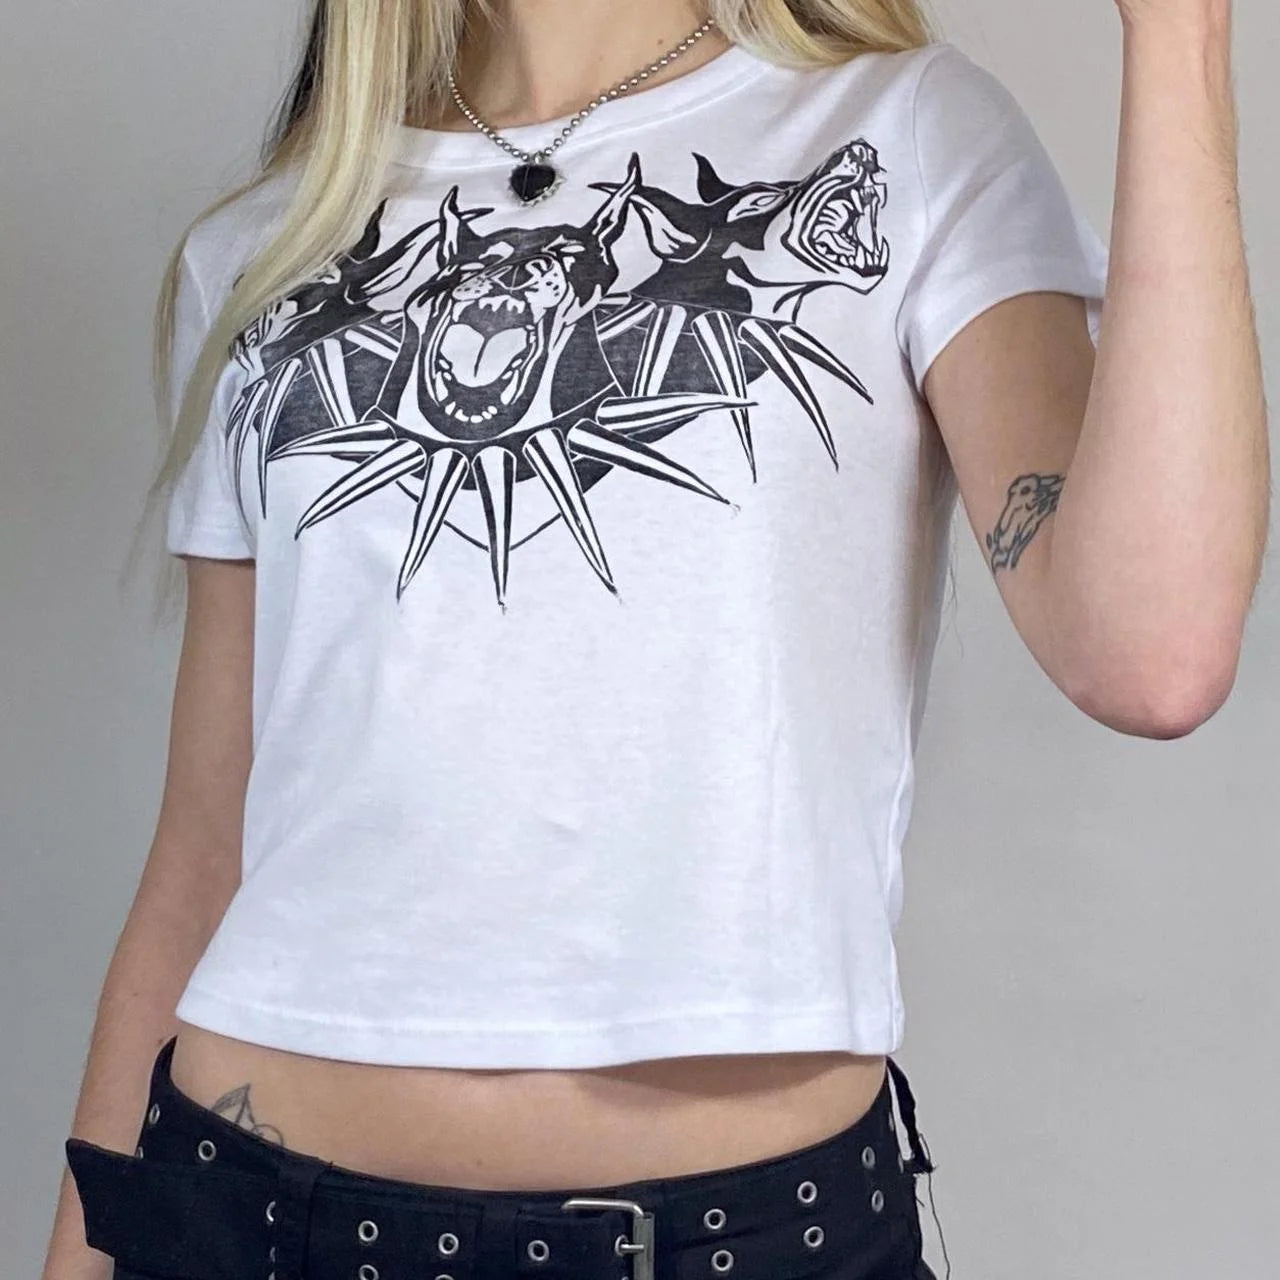 Women's Crop Tee with Edgy Graphic Print